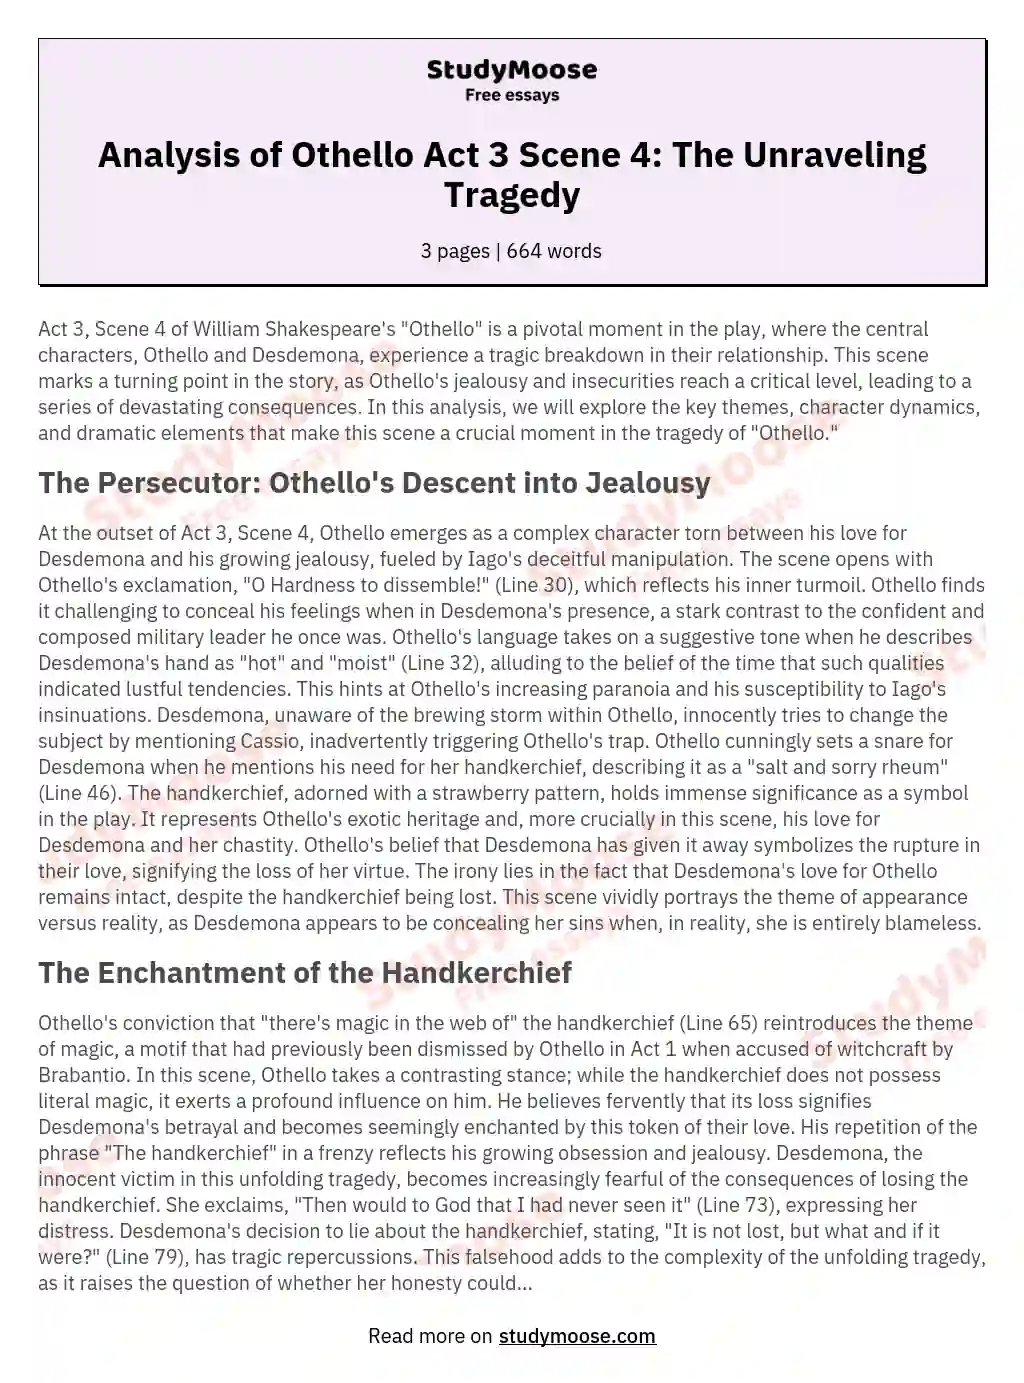 Analysis of Othello Act 3 Scene 4: The Unraveling Tragedy essay